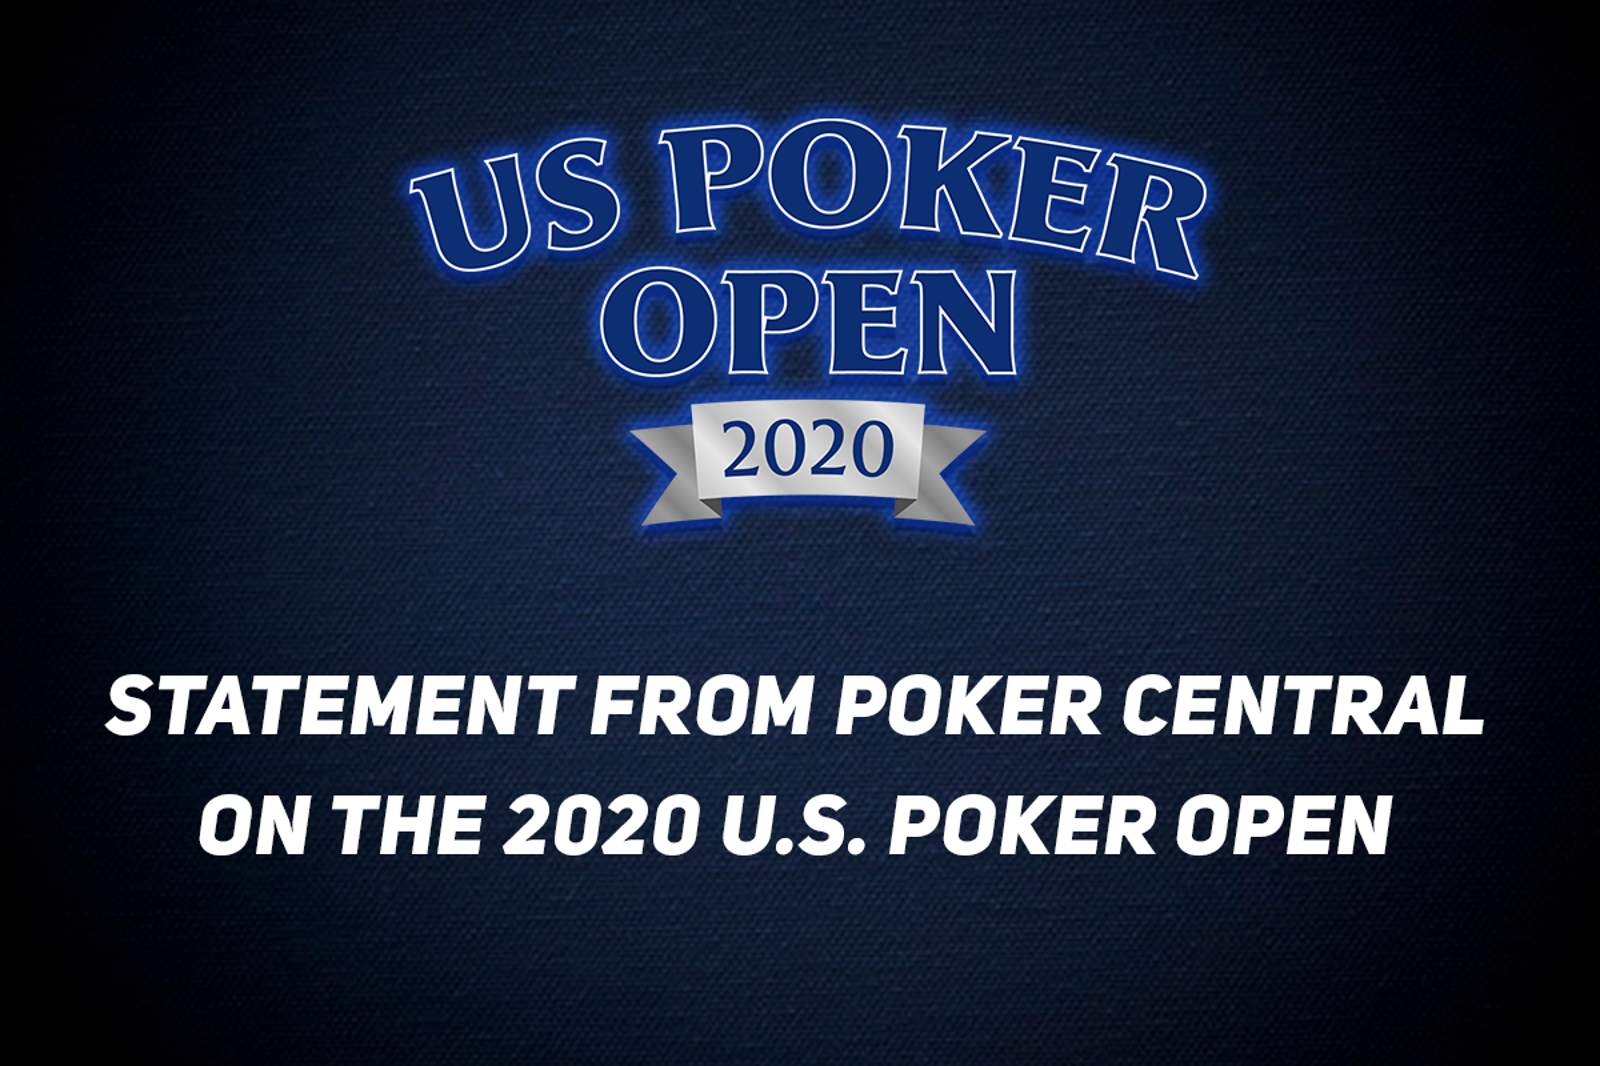 Statement from Poker Central on the 2020 U.S. Poker Open